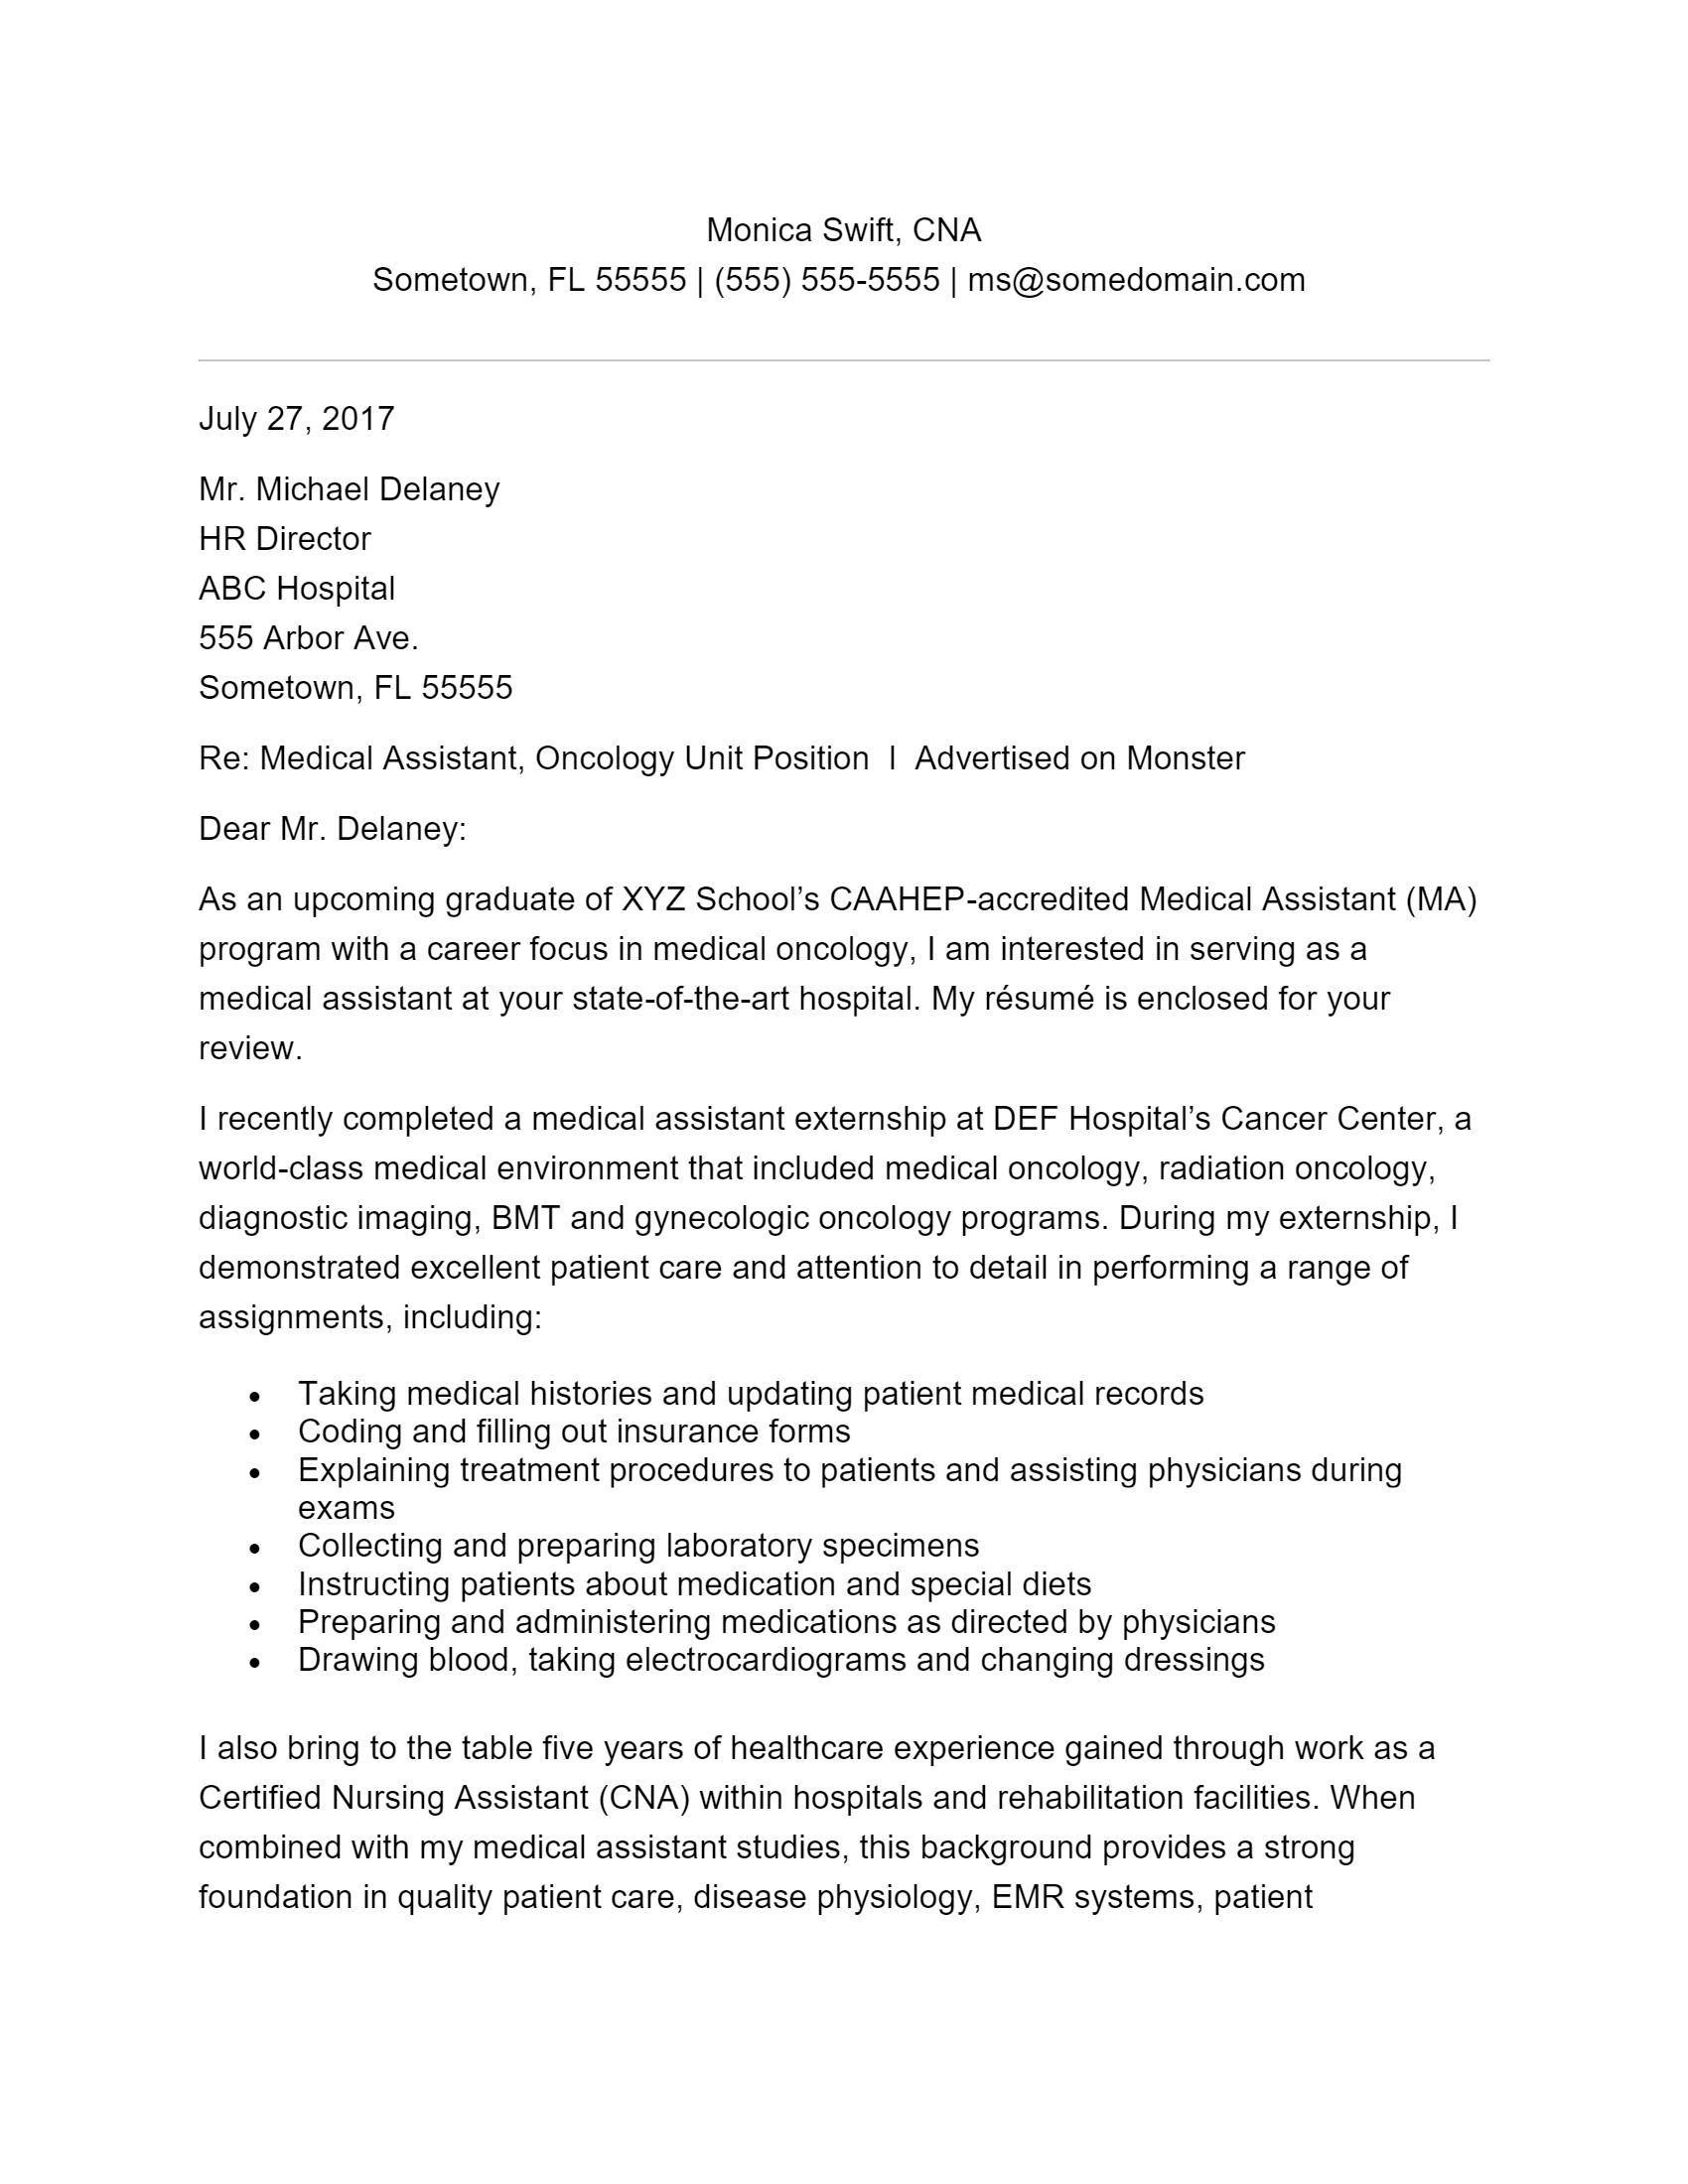 free medical assistant cover letter